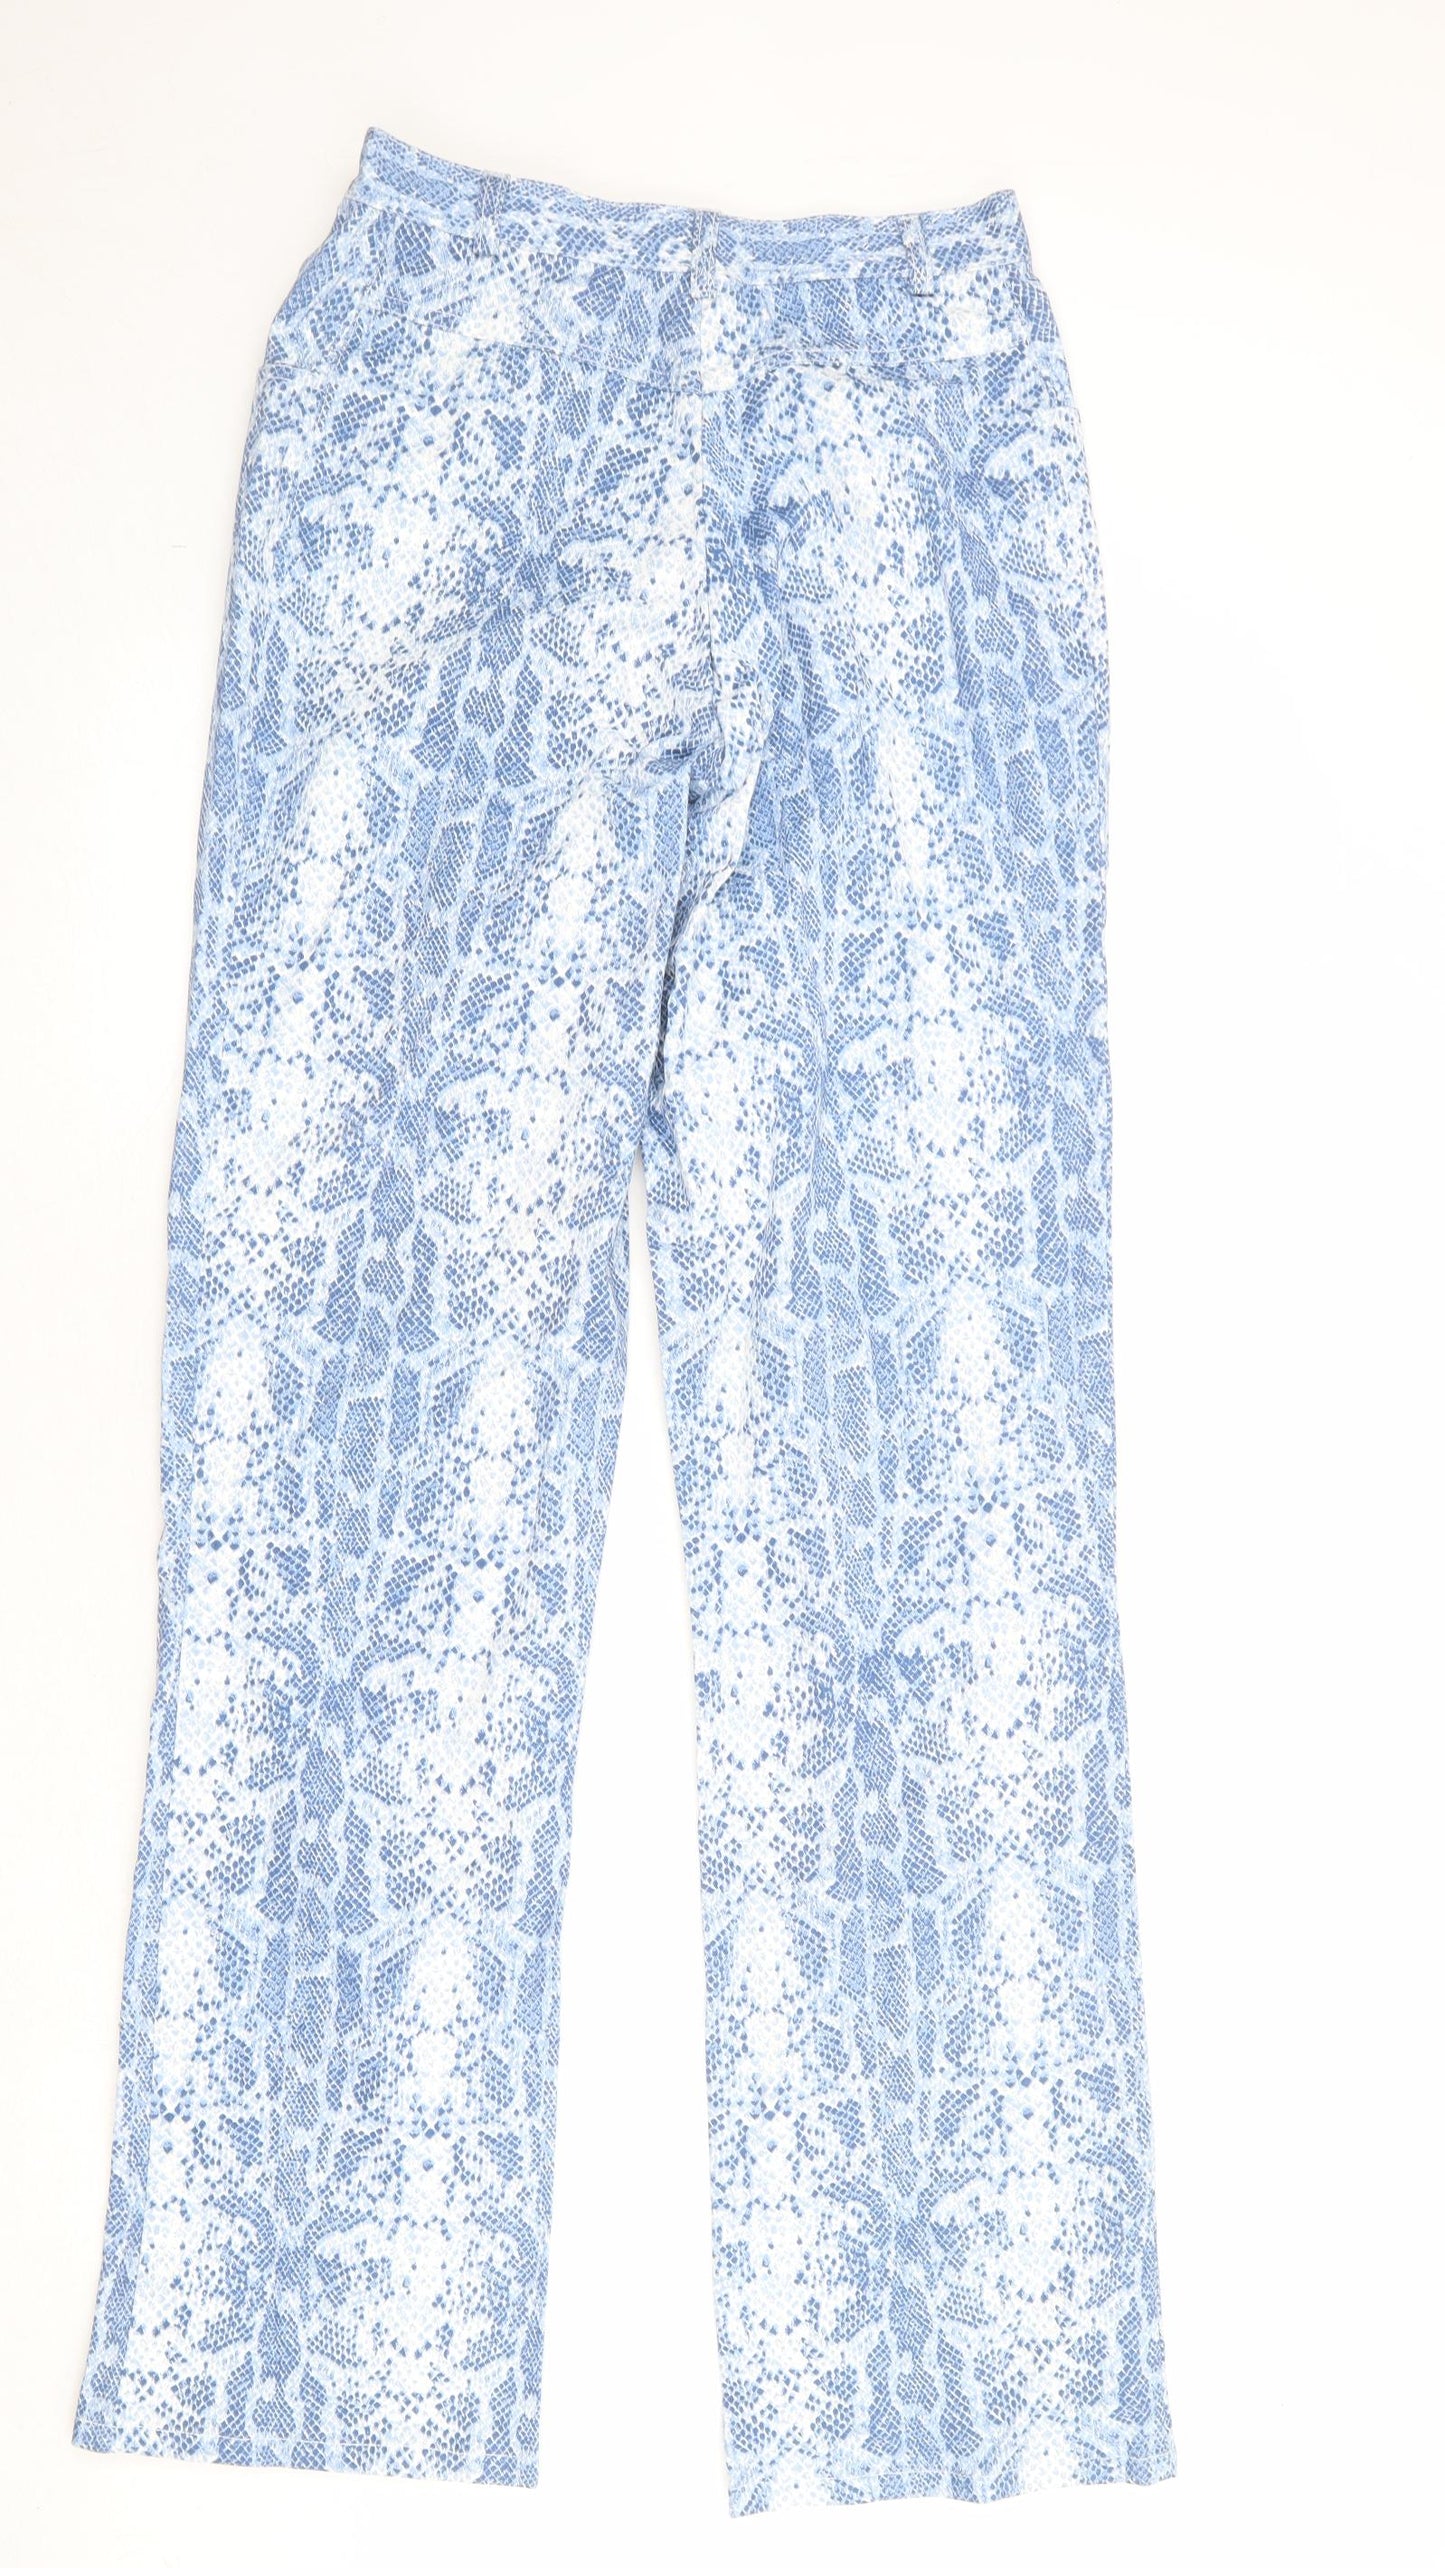 For Women Womens Blue Geometric Cotton Trousers Size 16 Regular Zip - Lace Overlay